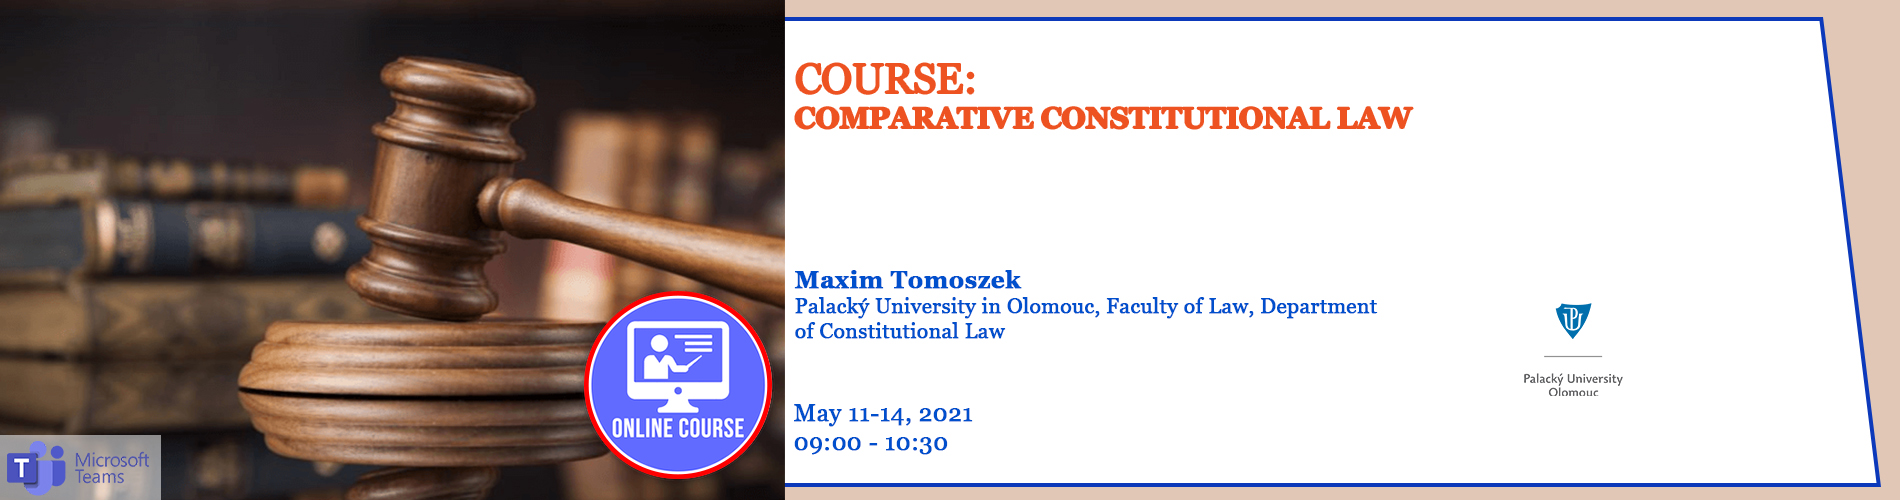 2021.05.11-05.14 Comparative Constitutional Law 